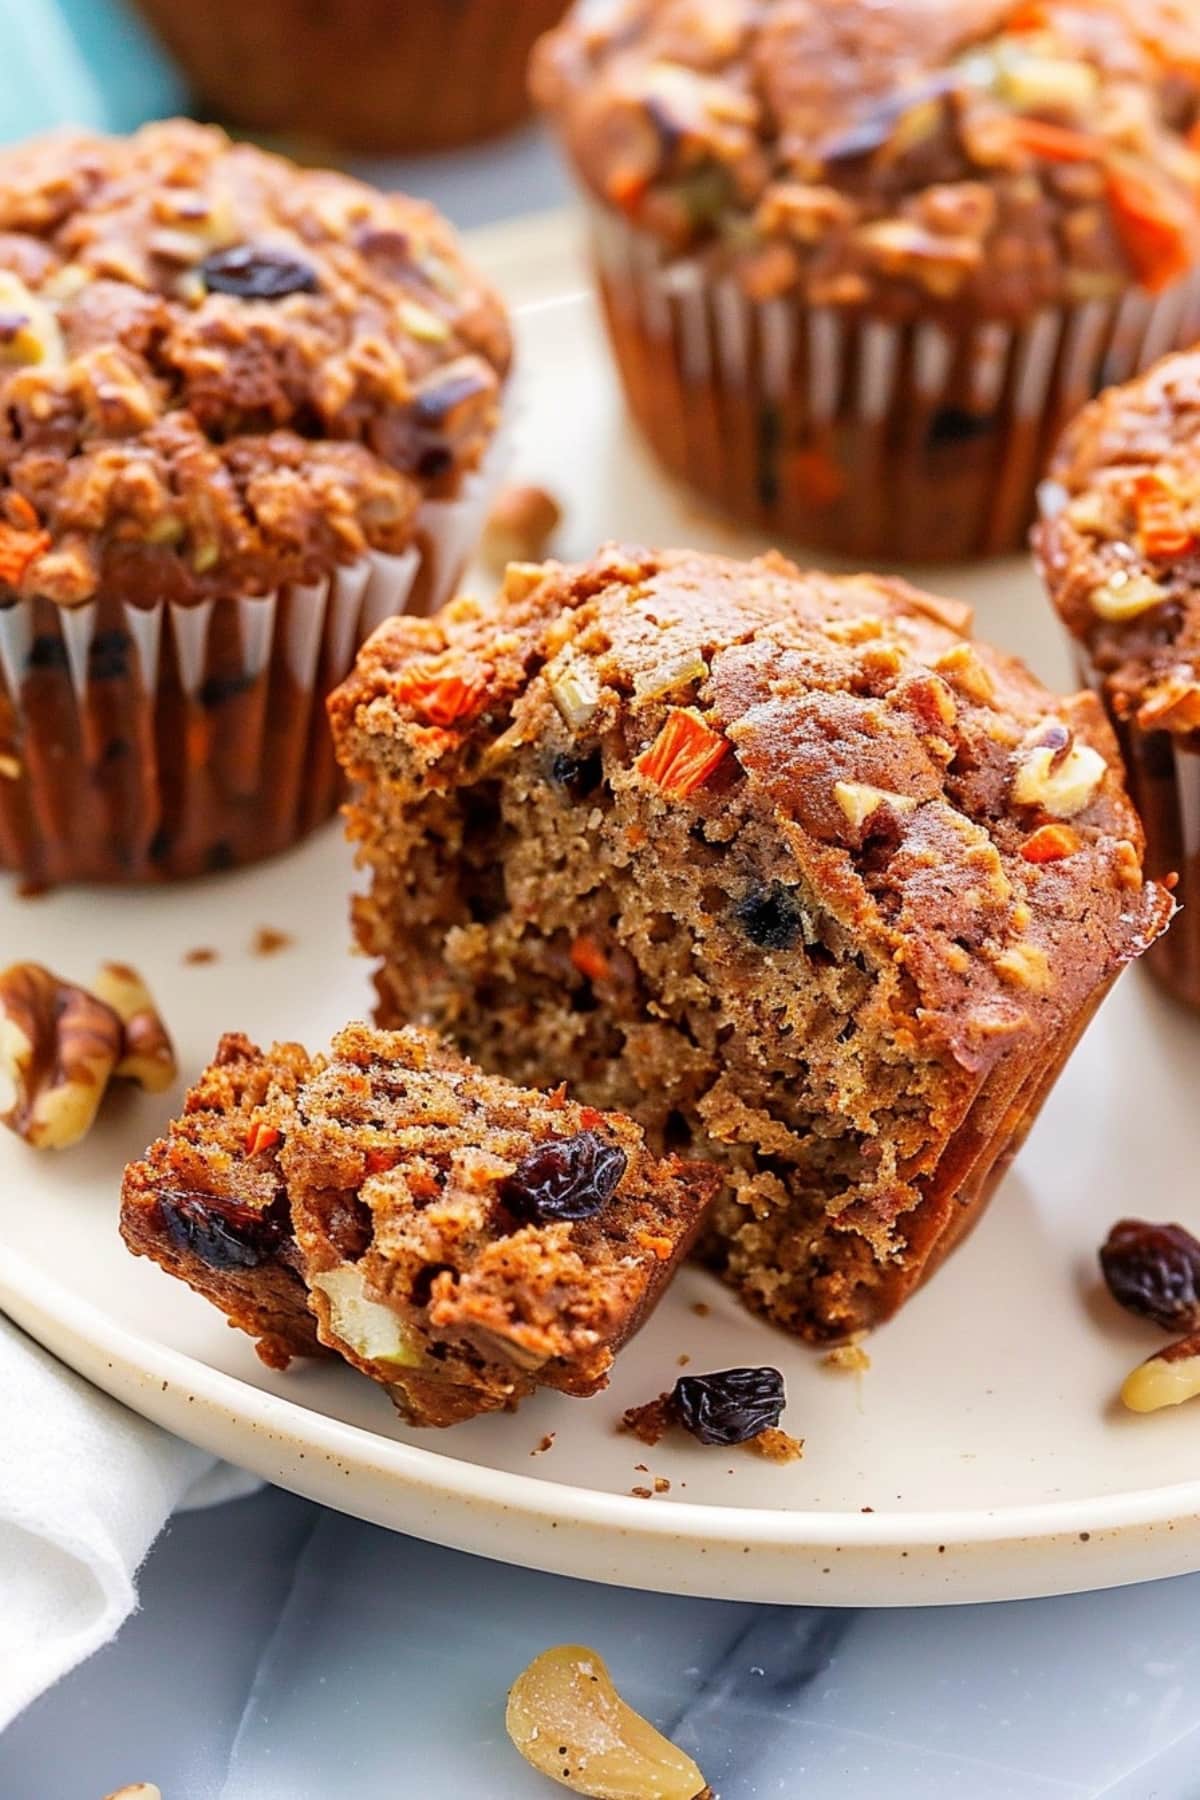 Morning glory muffins with raisins, carrots and nuts.